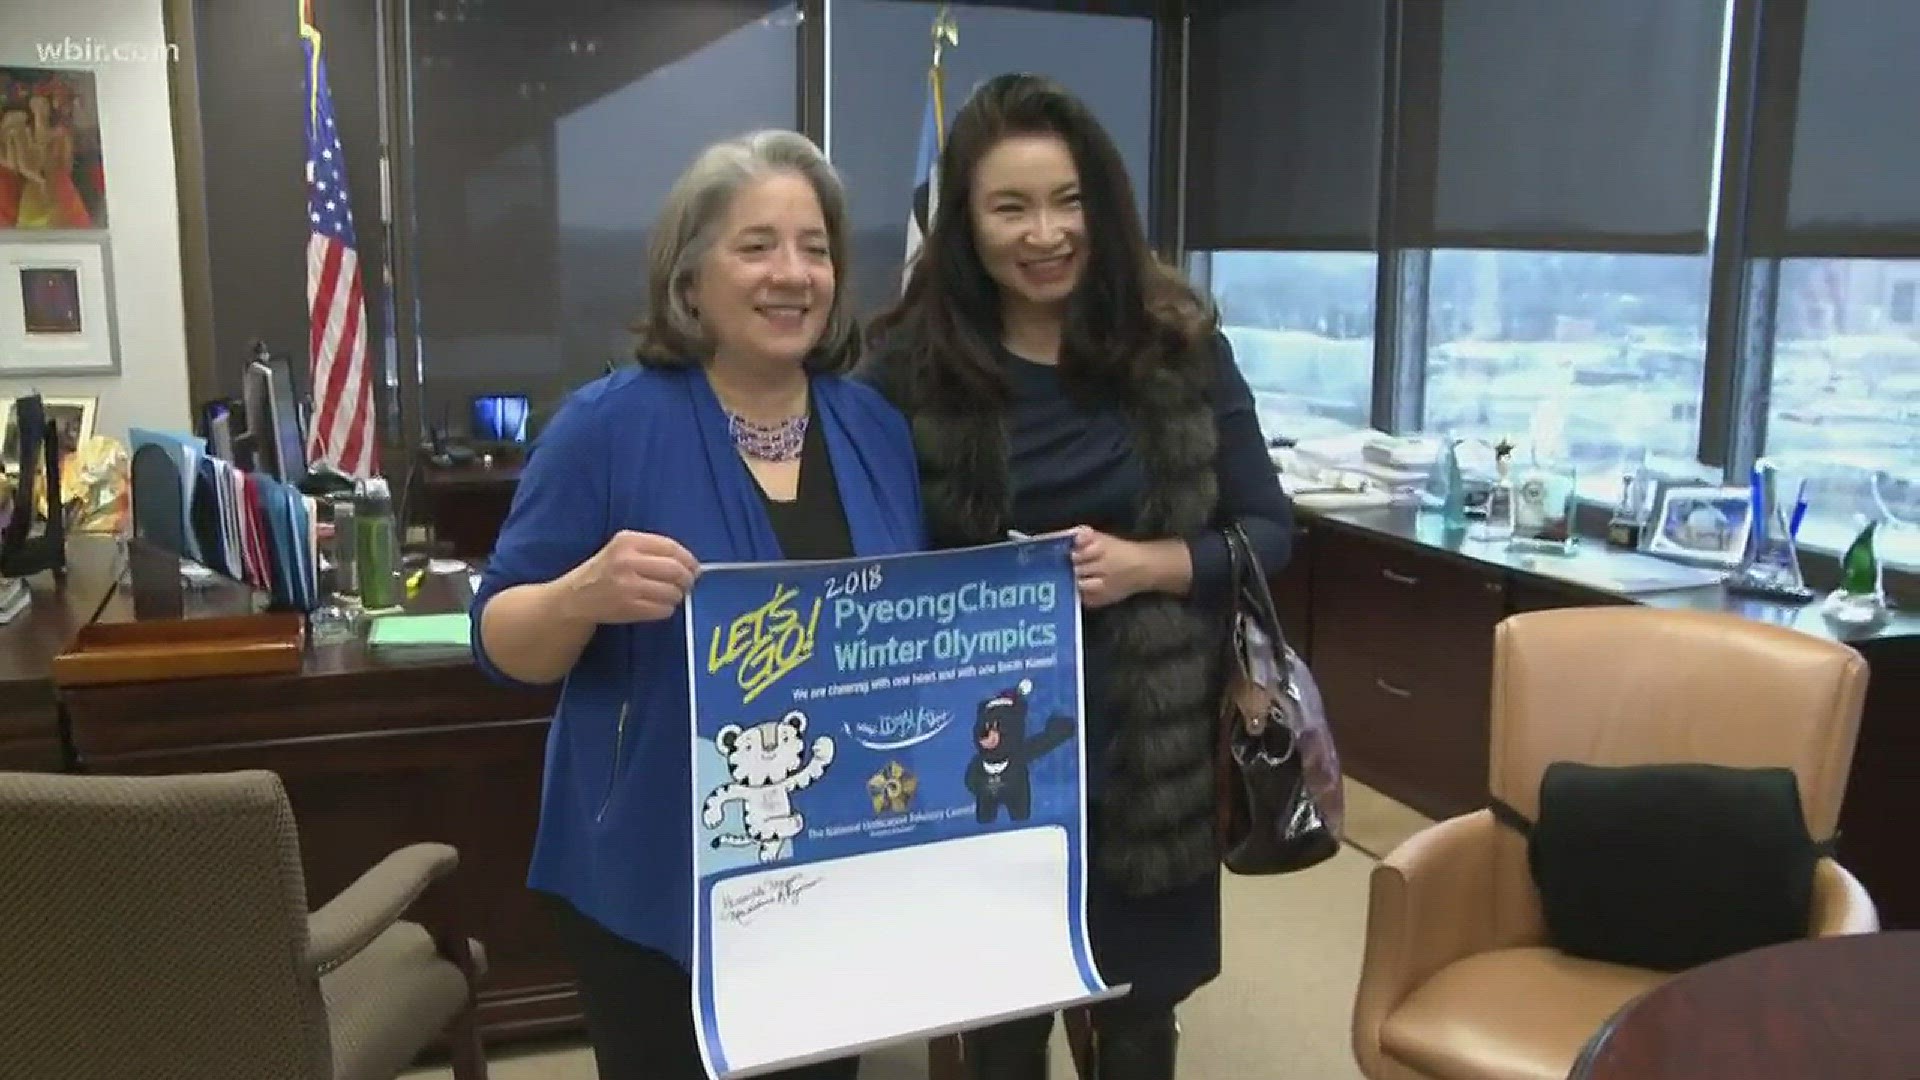 Knoxville Mayor Madeline Rogero signs a poster from the Knoxville Area Korean Association to join them in promoting a peace Winter Olympics in South Korea this February.January 22, 2018-4pm